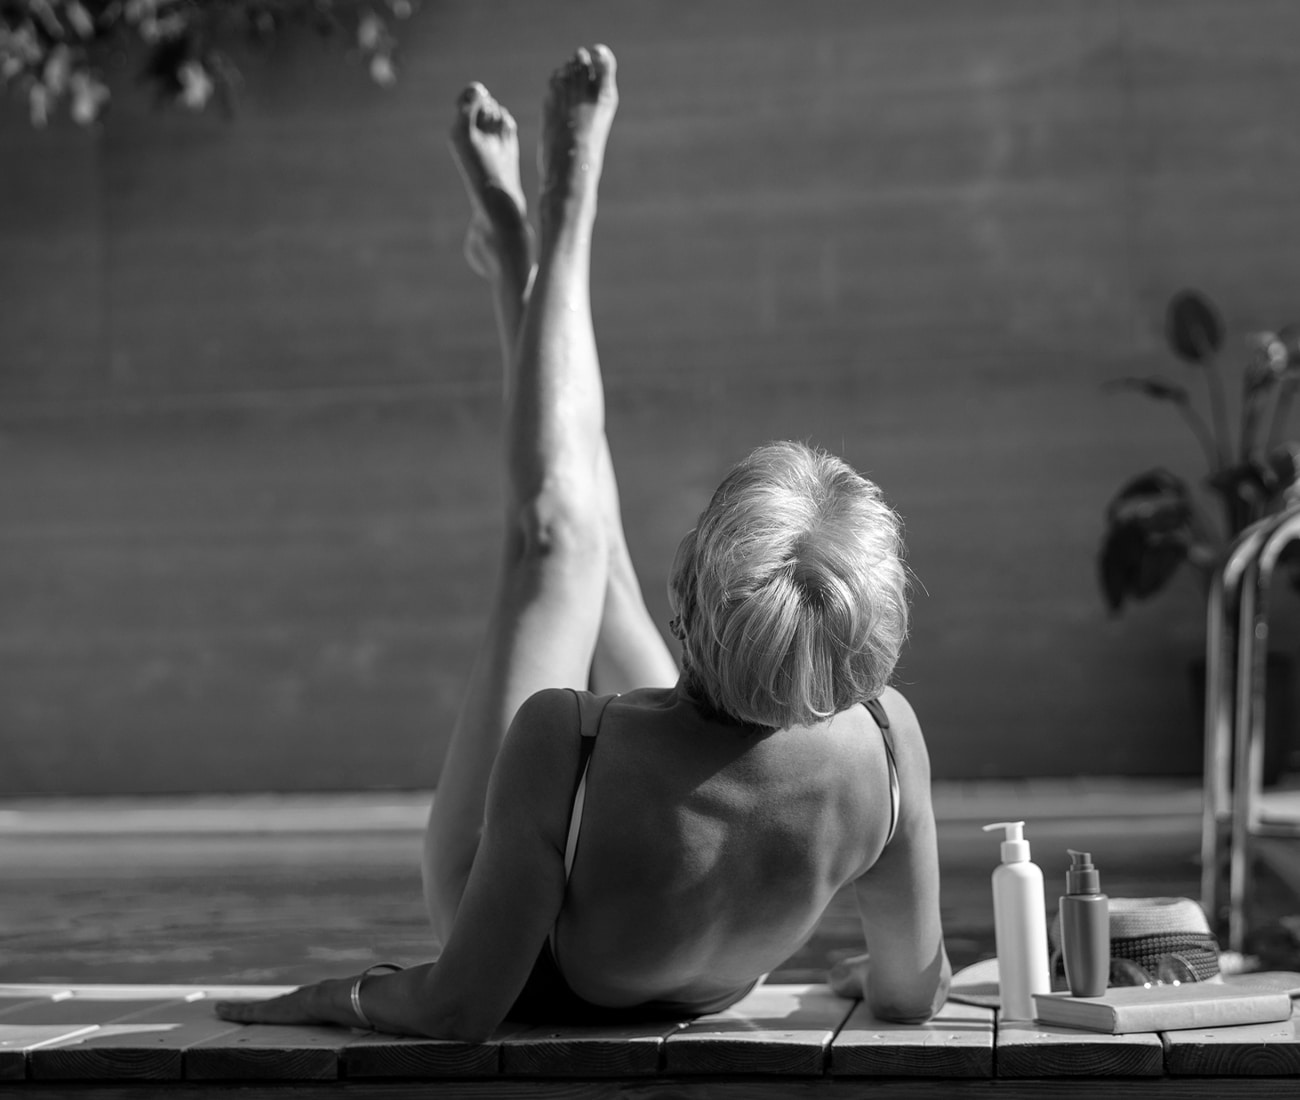 A Woman Lying Next To A Jacuzzi With Her Legs Crossed And Up In The Air, Black And White Photo